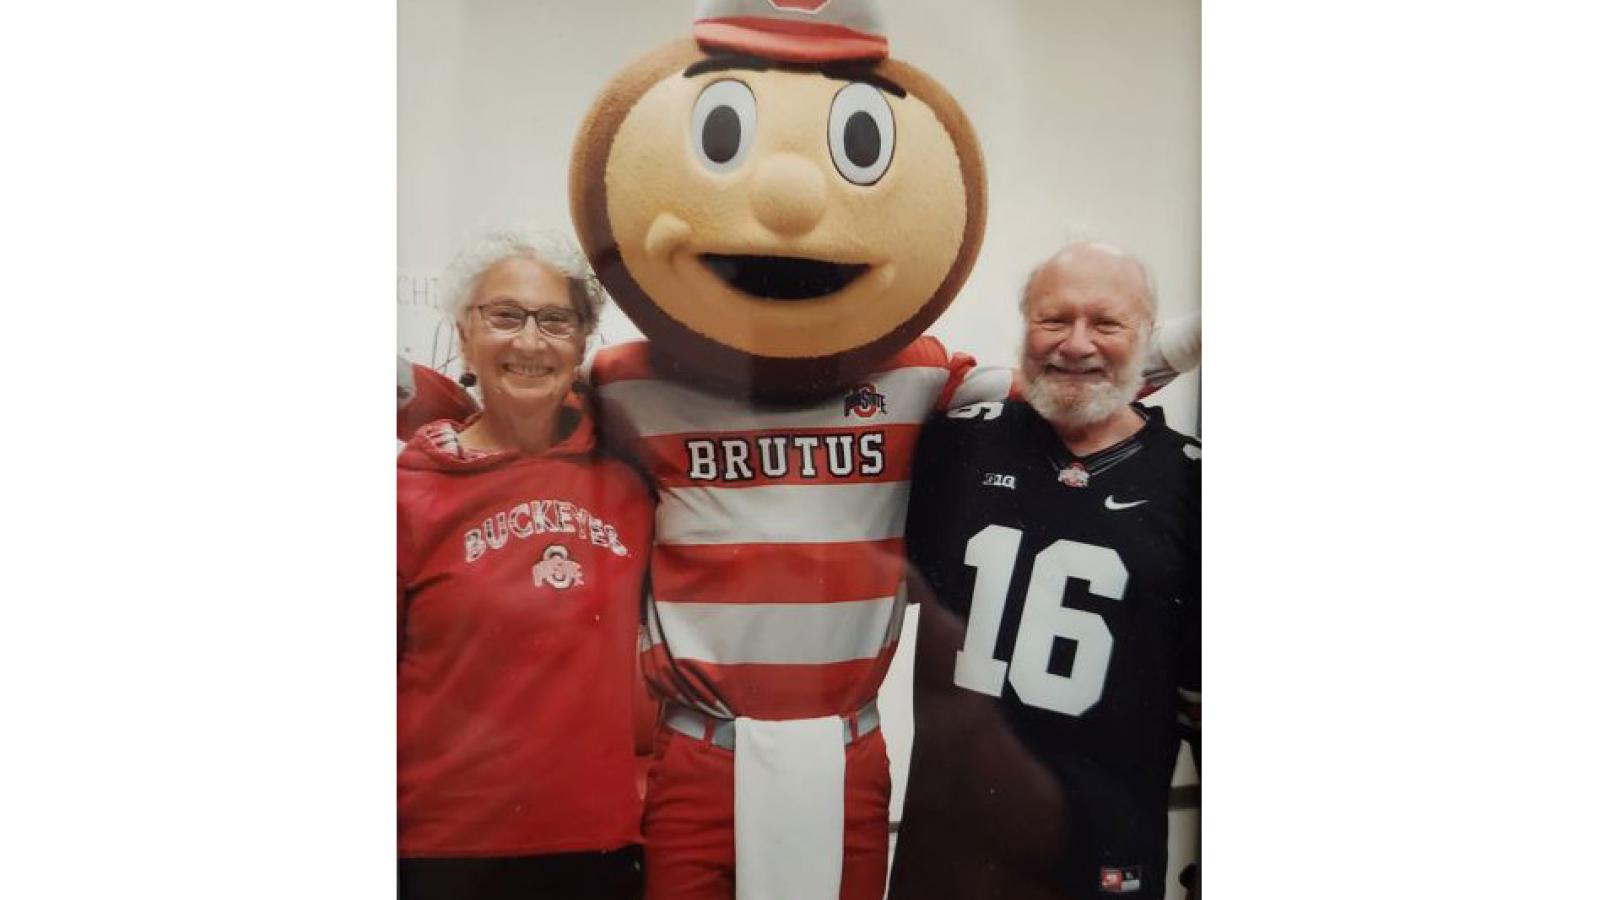 Dr. Fox with wife, Carol, and Brutus